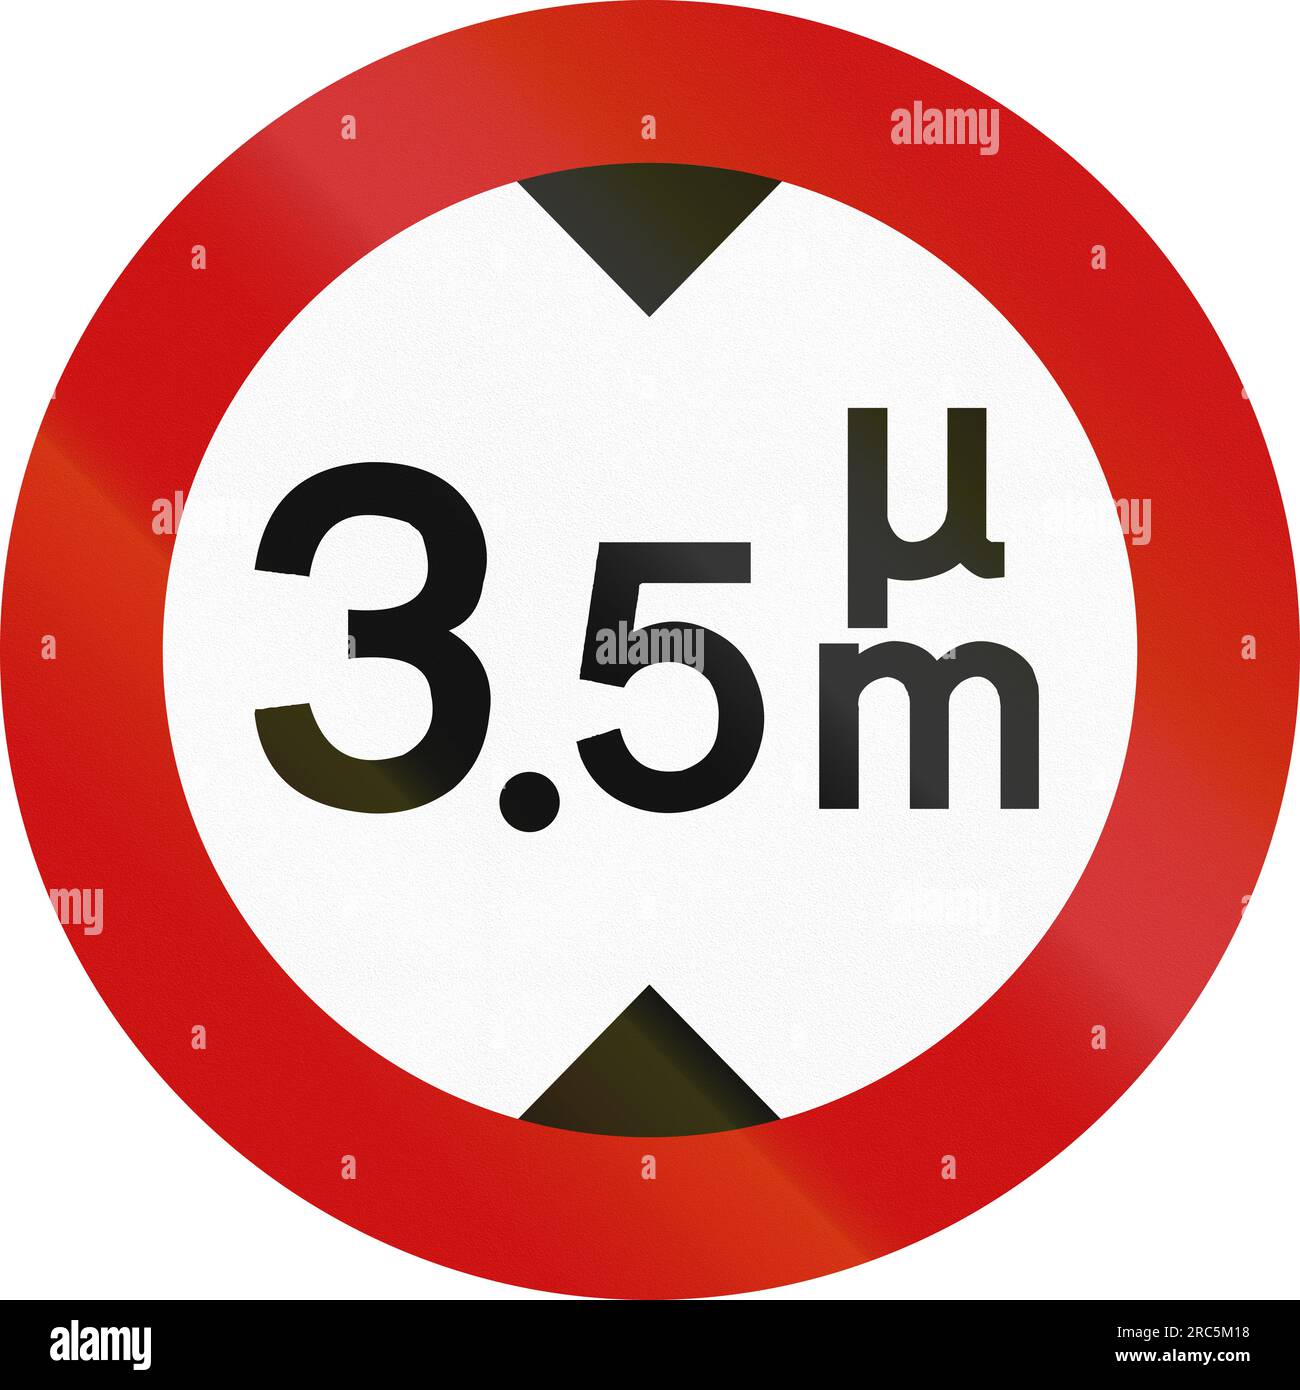 Greek sign prohibiting thoroughfare of vehicles with a height over 3.5 meters. The upper token is the Greek letter m/mu. Stock Photo